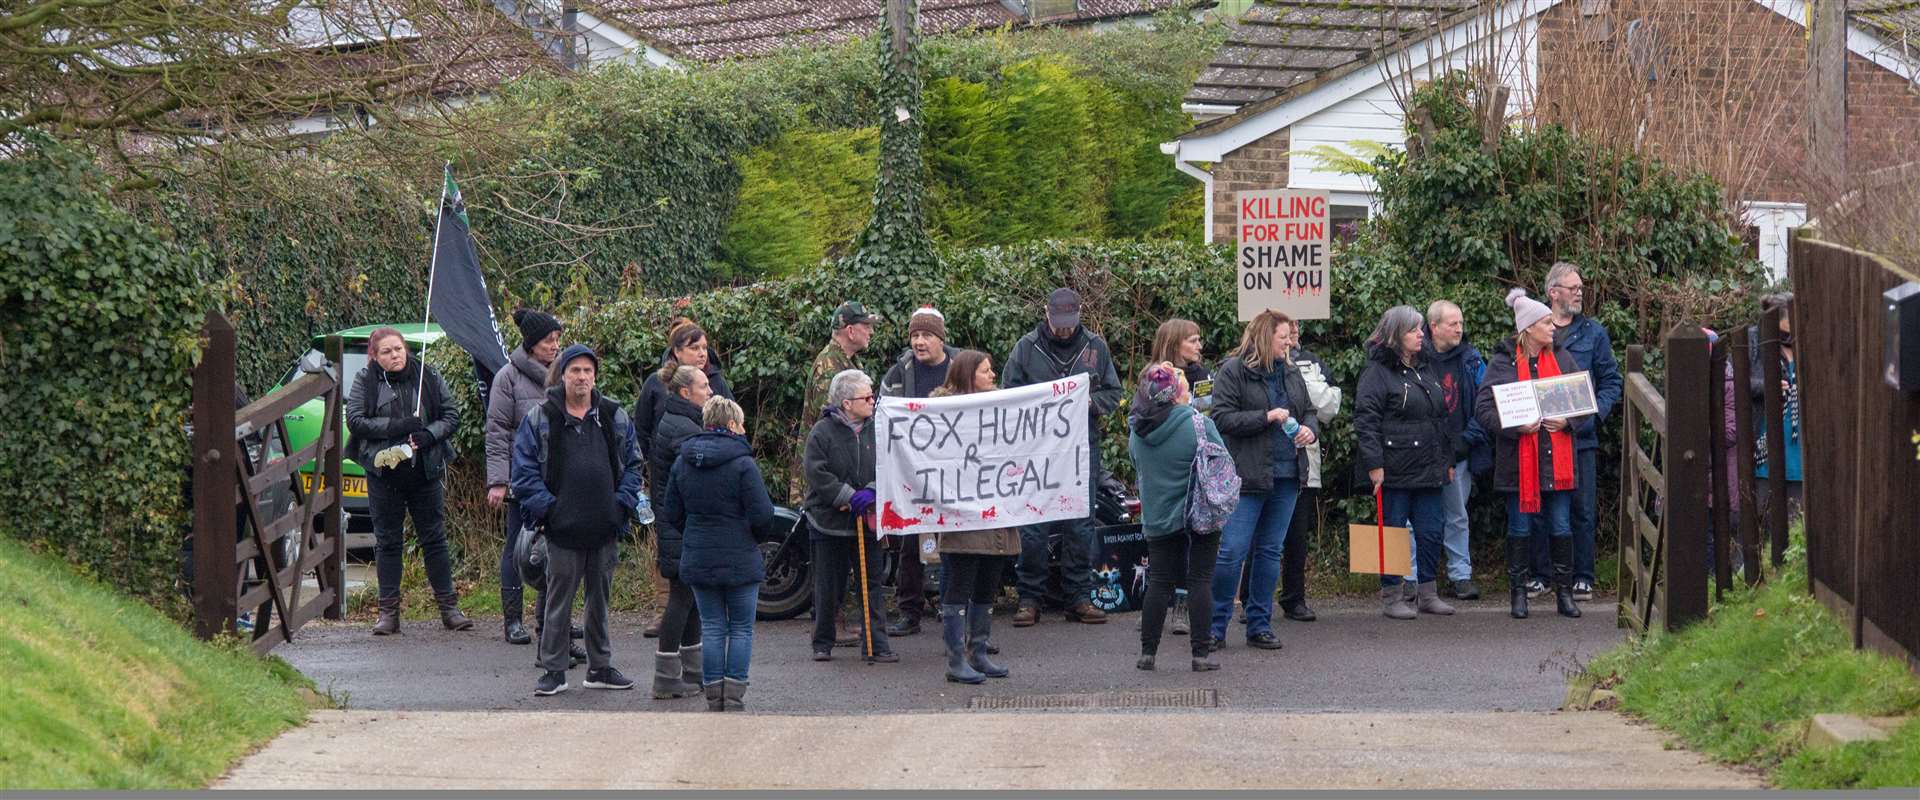 Anti-hunt protesters in Elham, Boxing Day 2018. Picture: Nick Onslow.